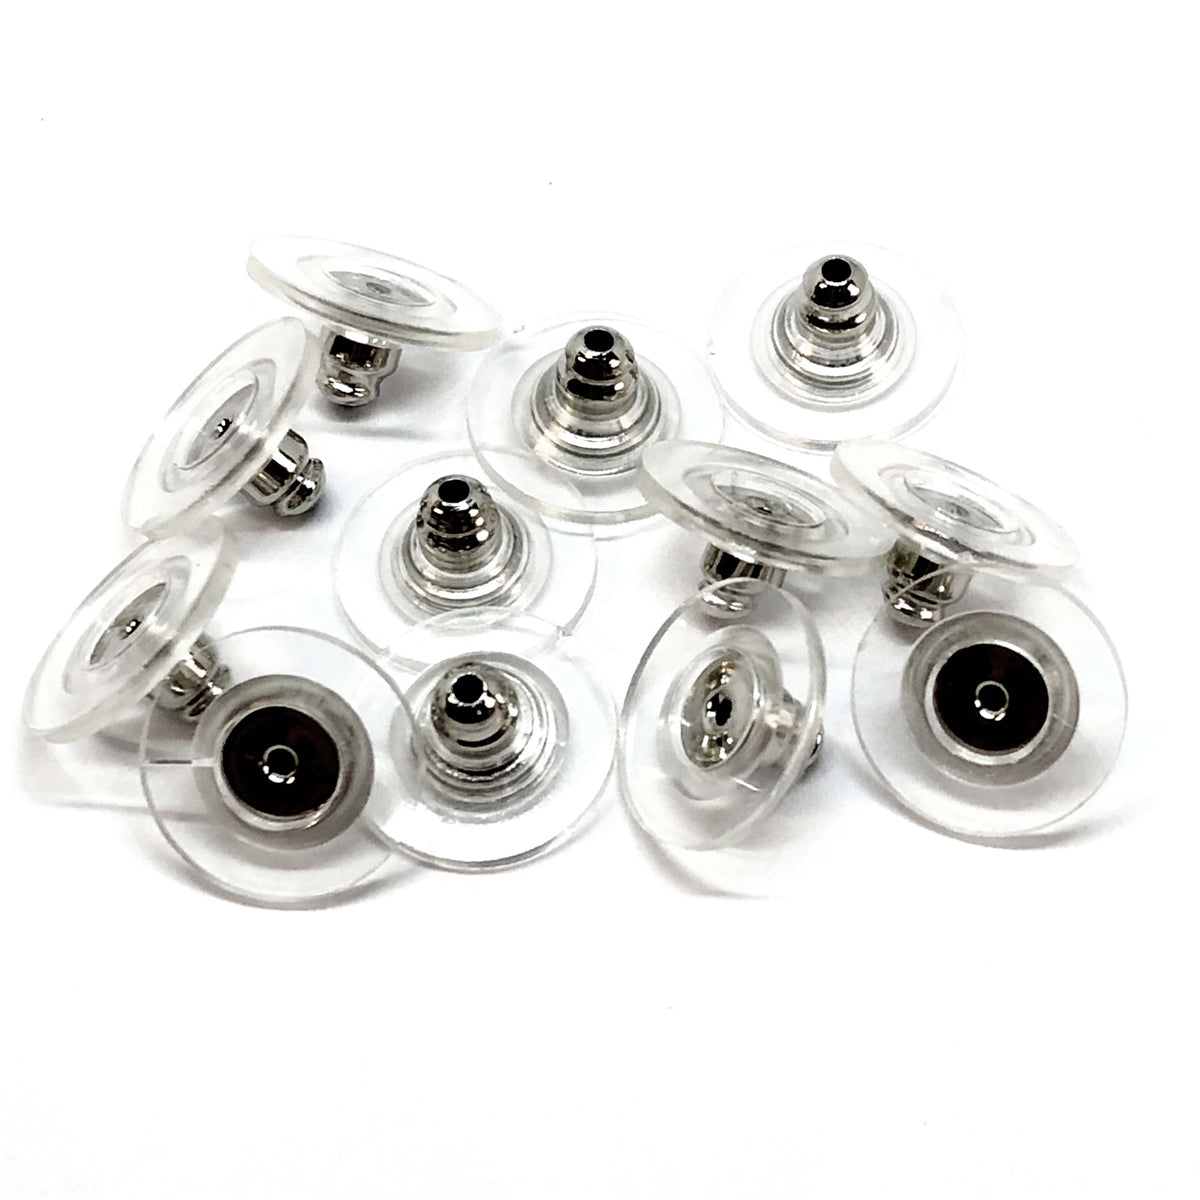 Solutions Mixed Metal Replacement Earring Backs, Wing Back Style, 24 Pieces